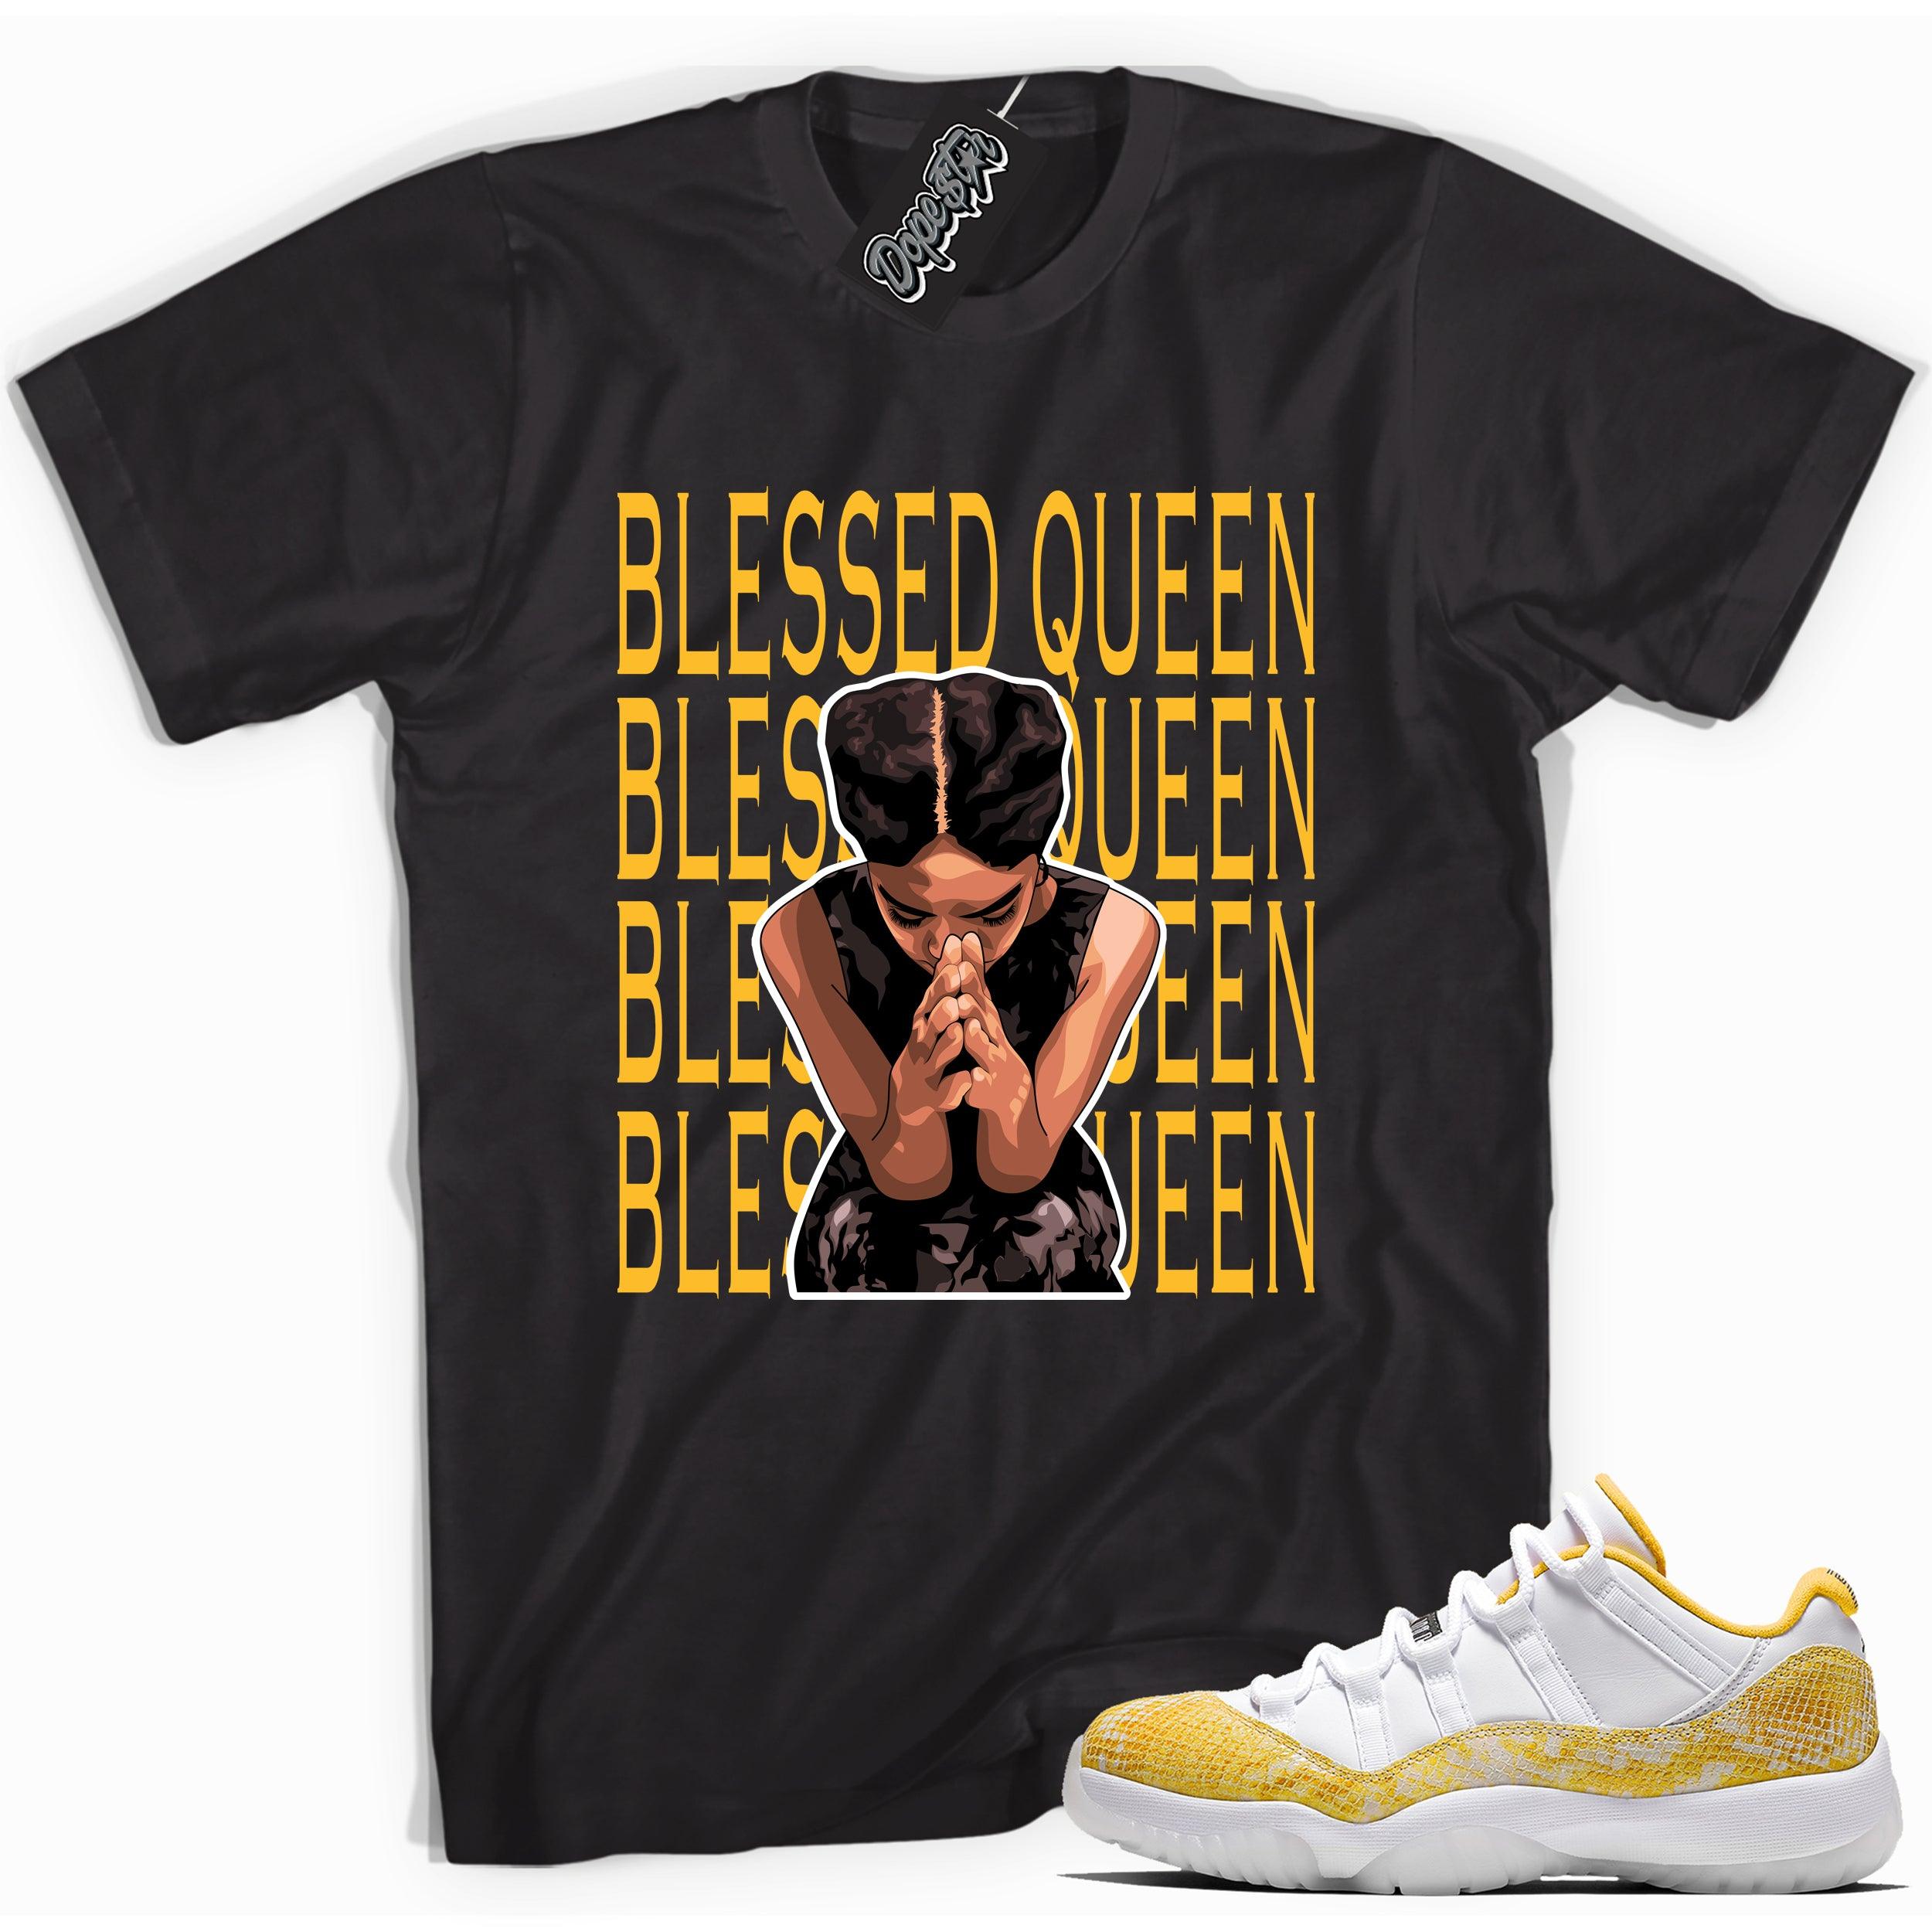 Cool black graphic tee with 'blessed queen' print, that perfectly matches  Air Jordan 11 Retro Low Yellow Snakeskin sneakers